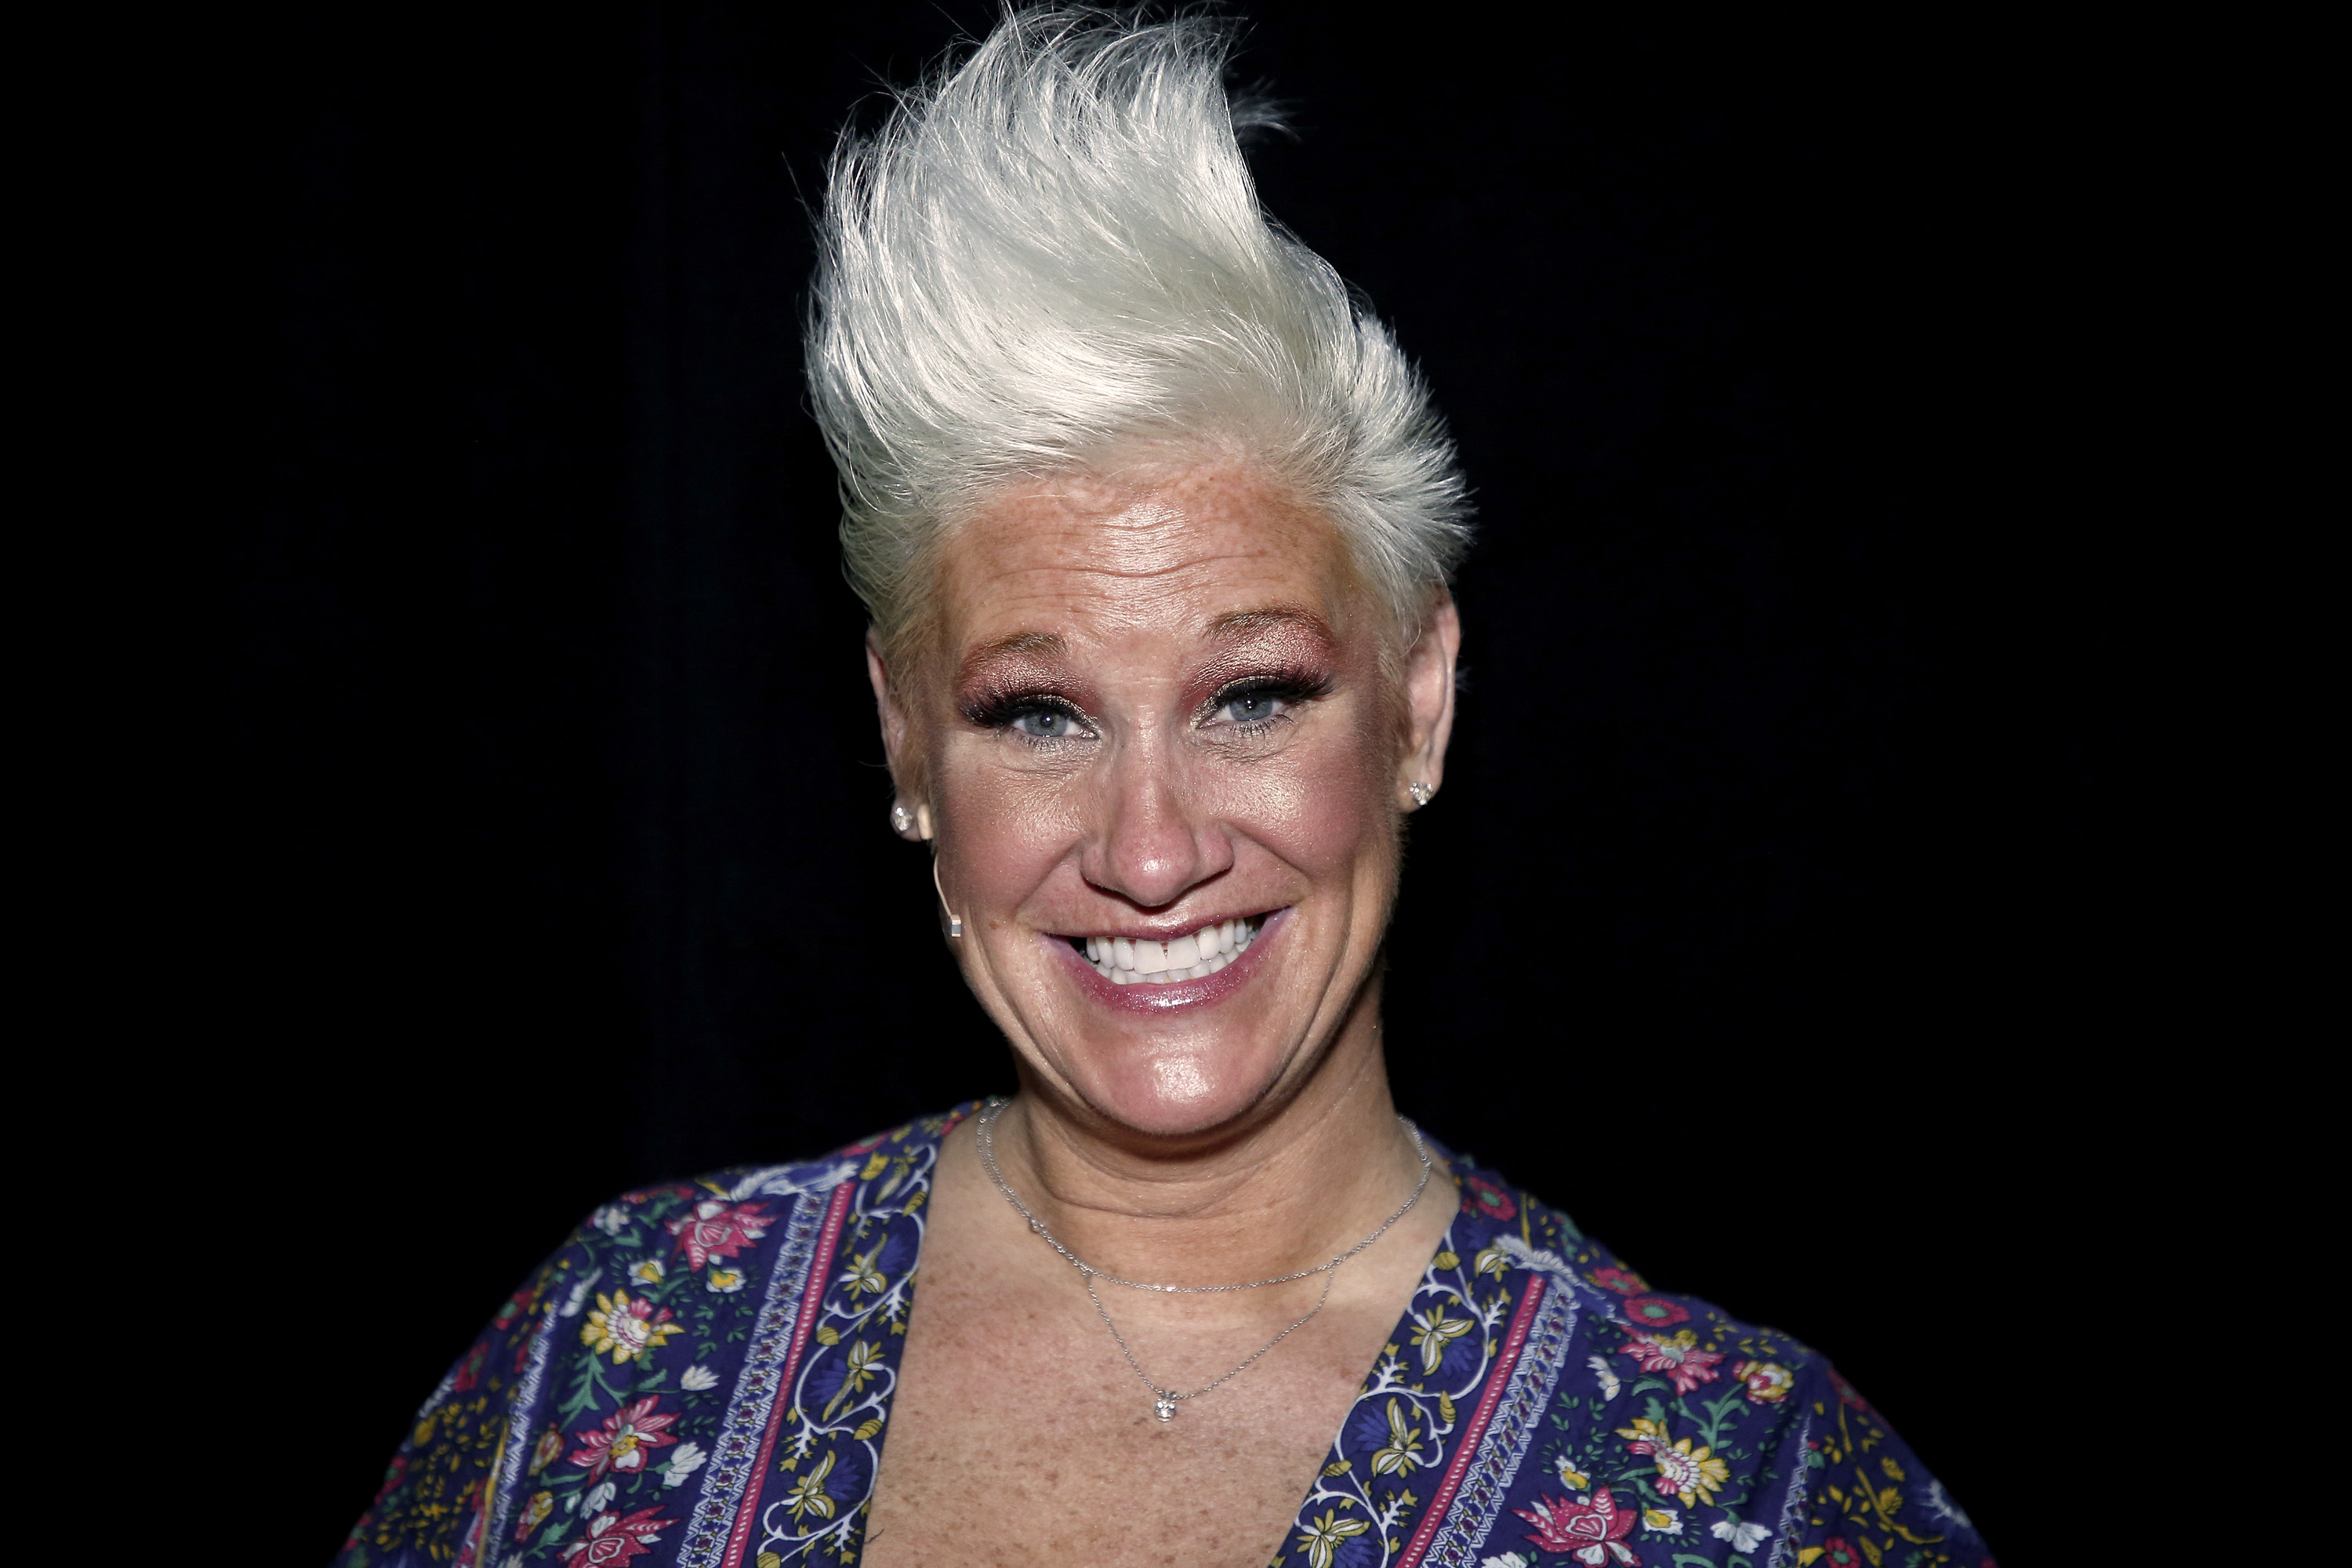 Chef Anne Burrell of Food Network